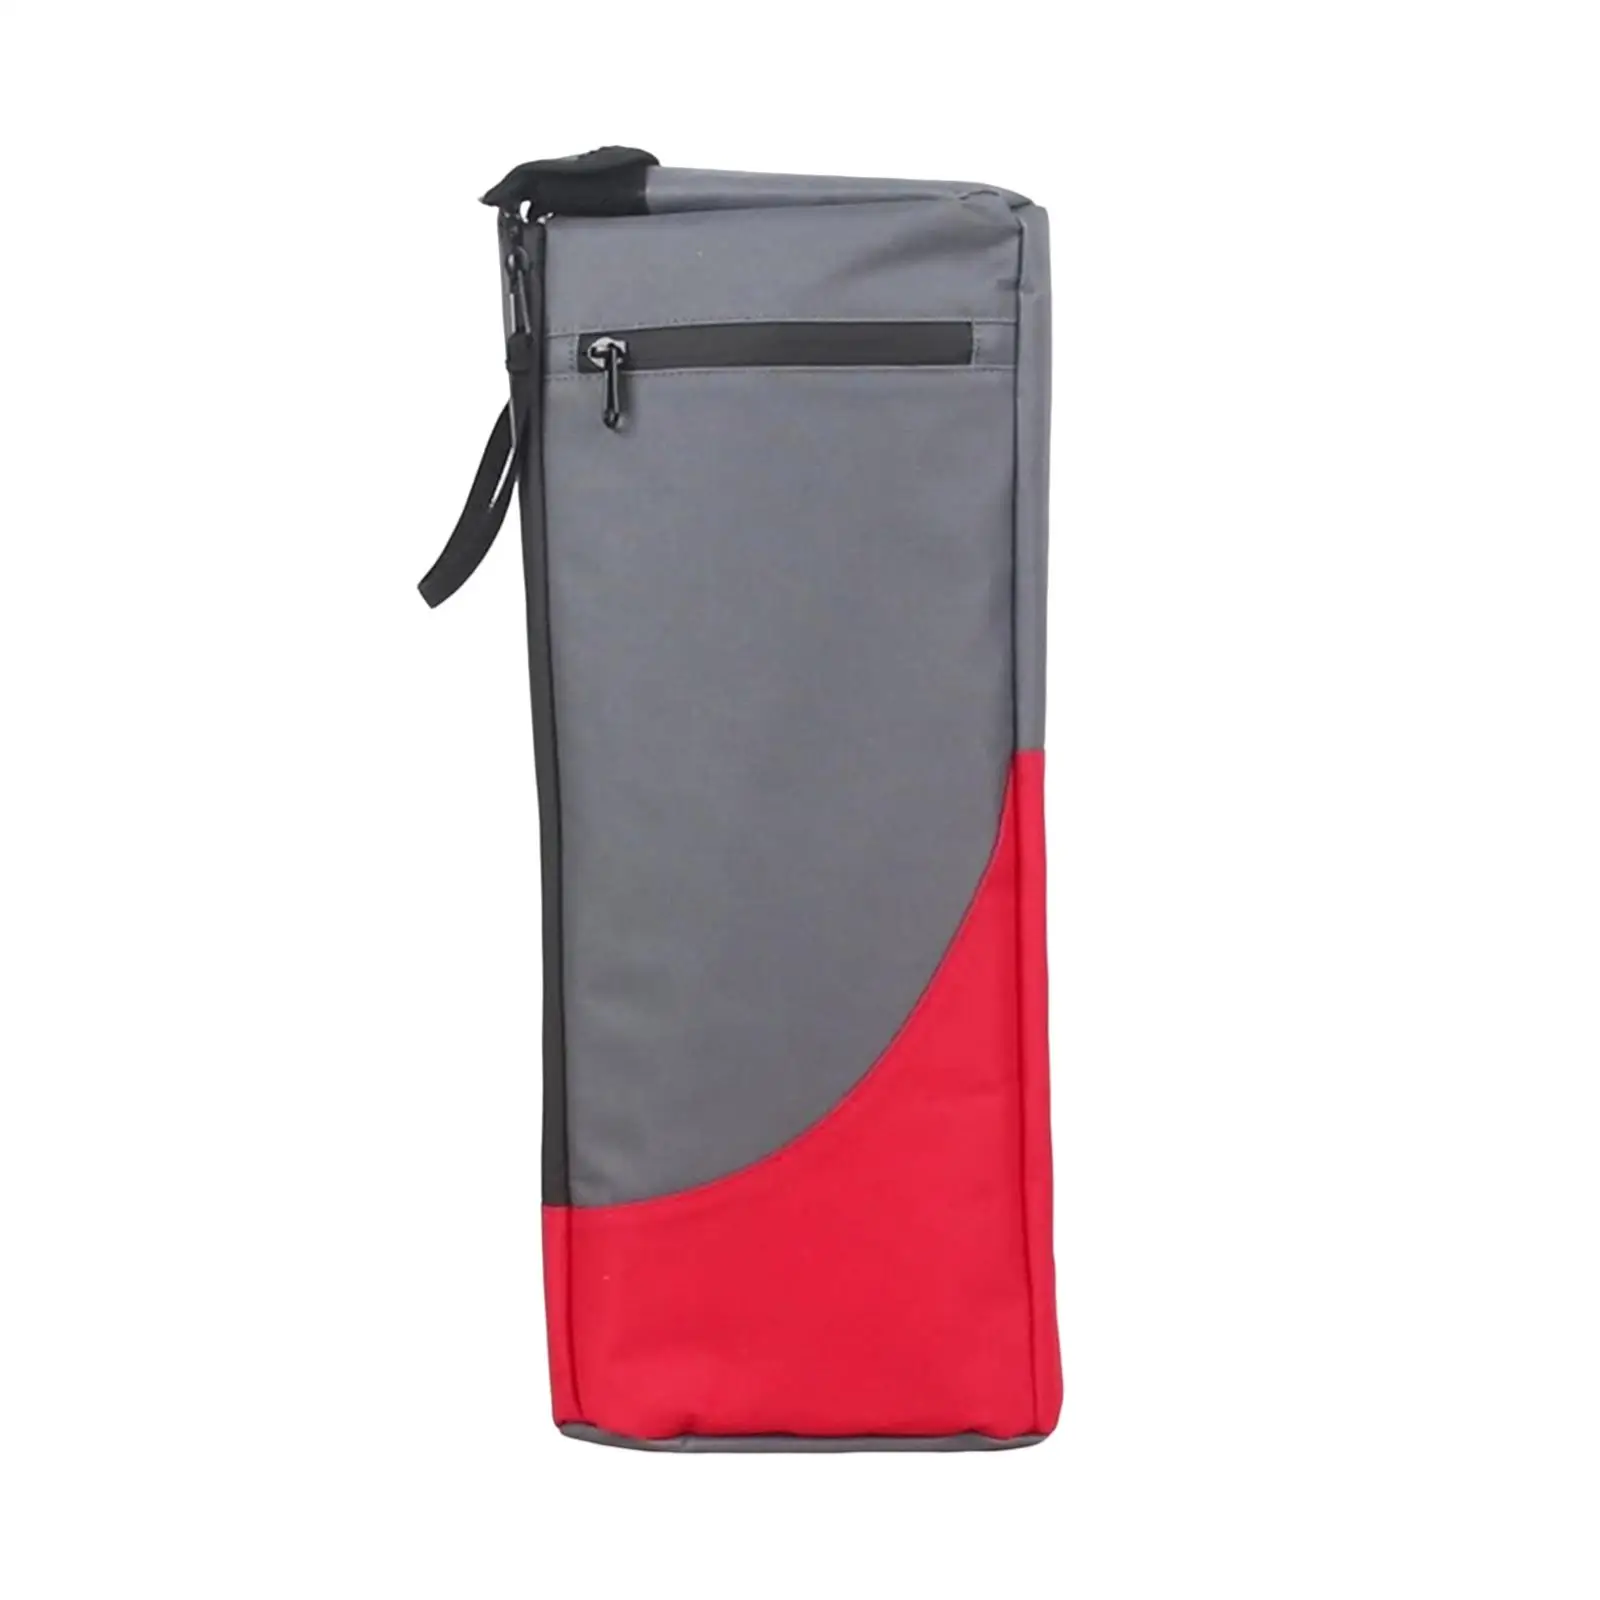 Portable Golf Cooler Bag, Storage Hiking Pouch Traveling Food Drink Carrier